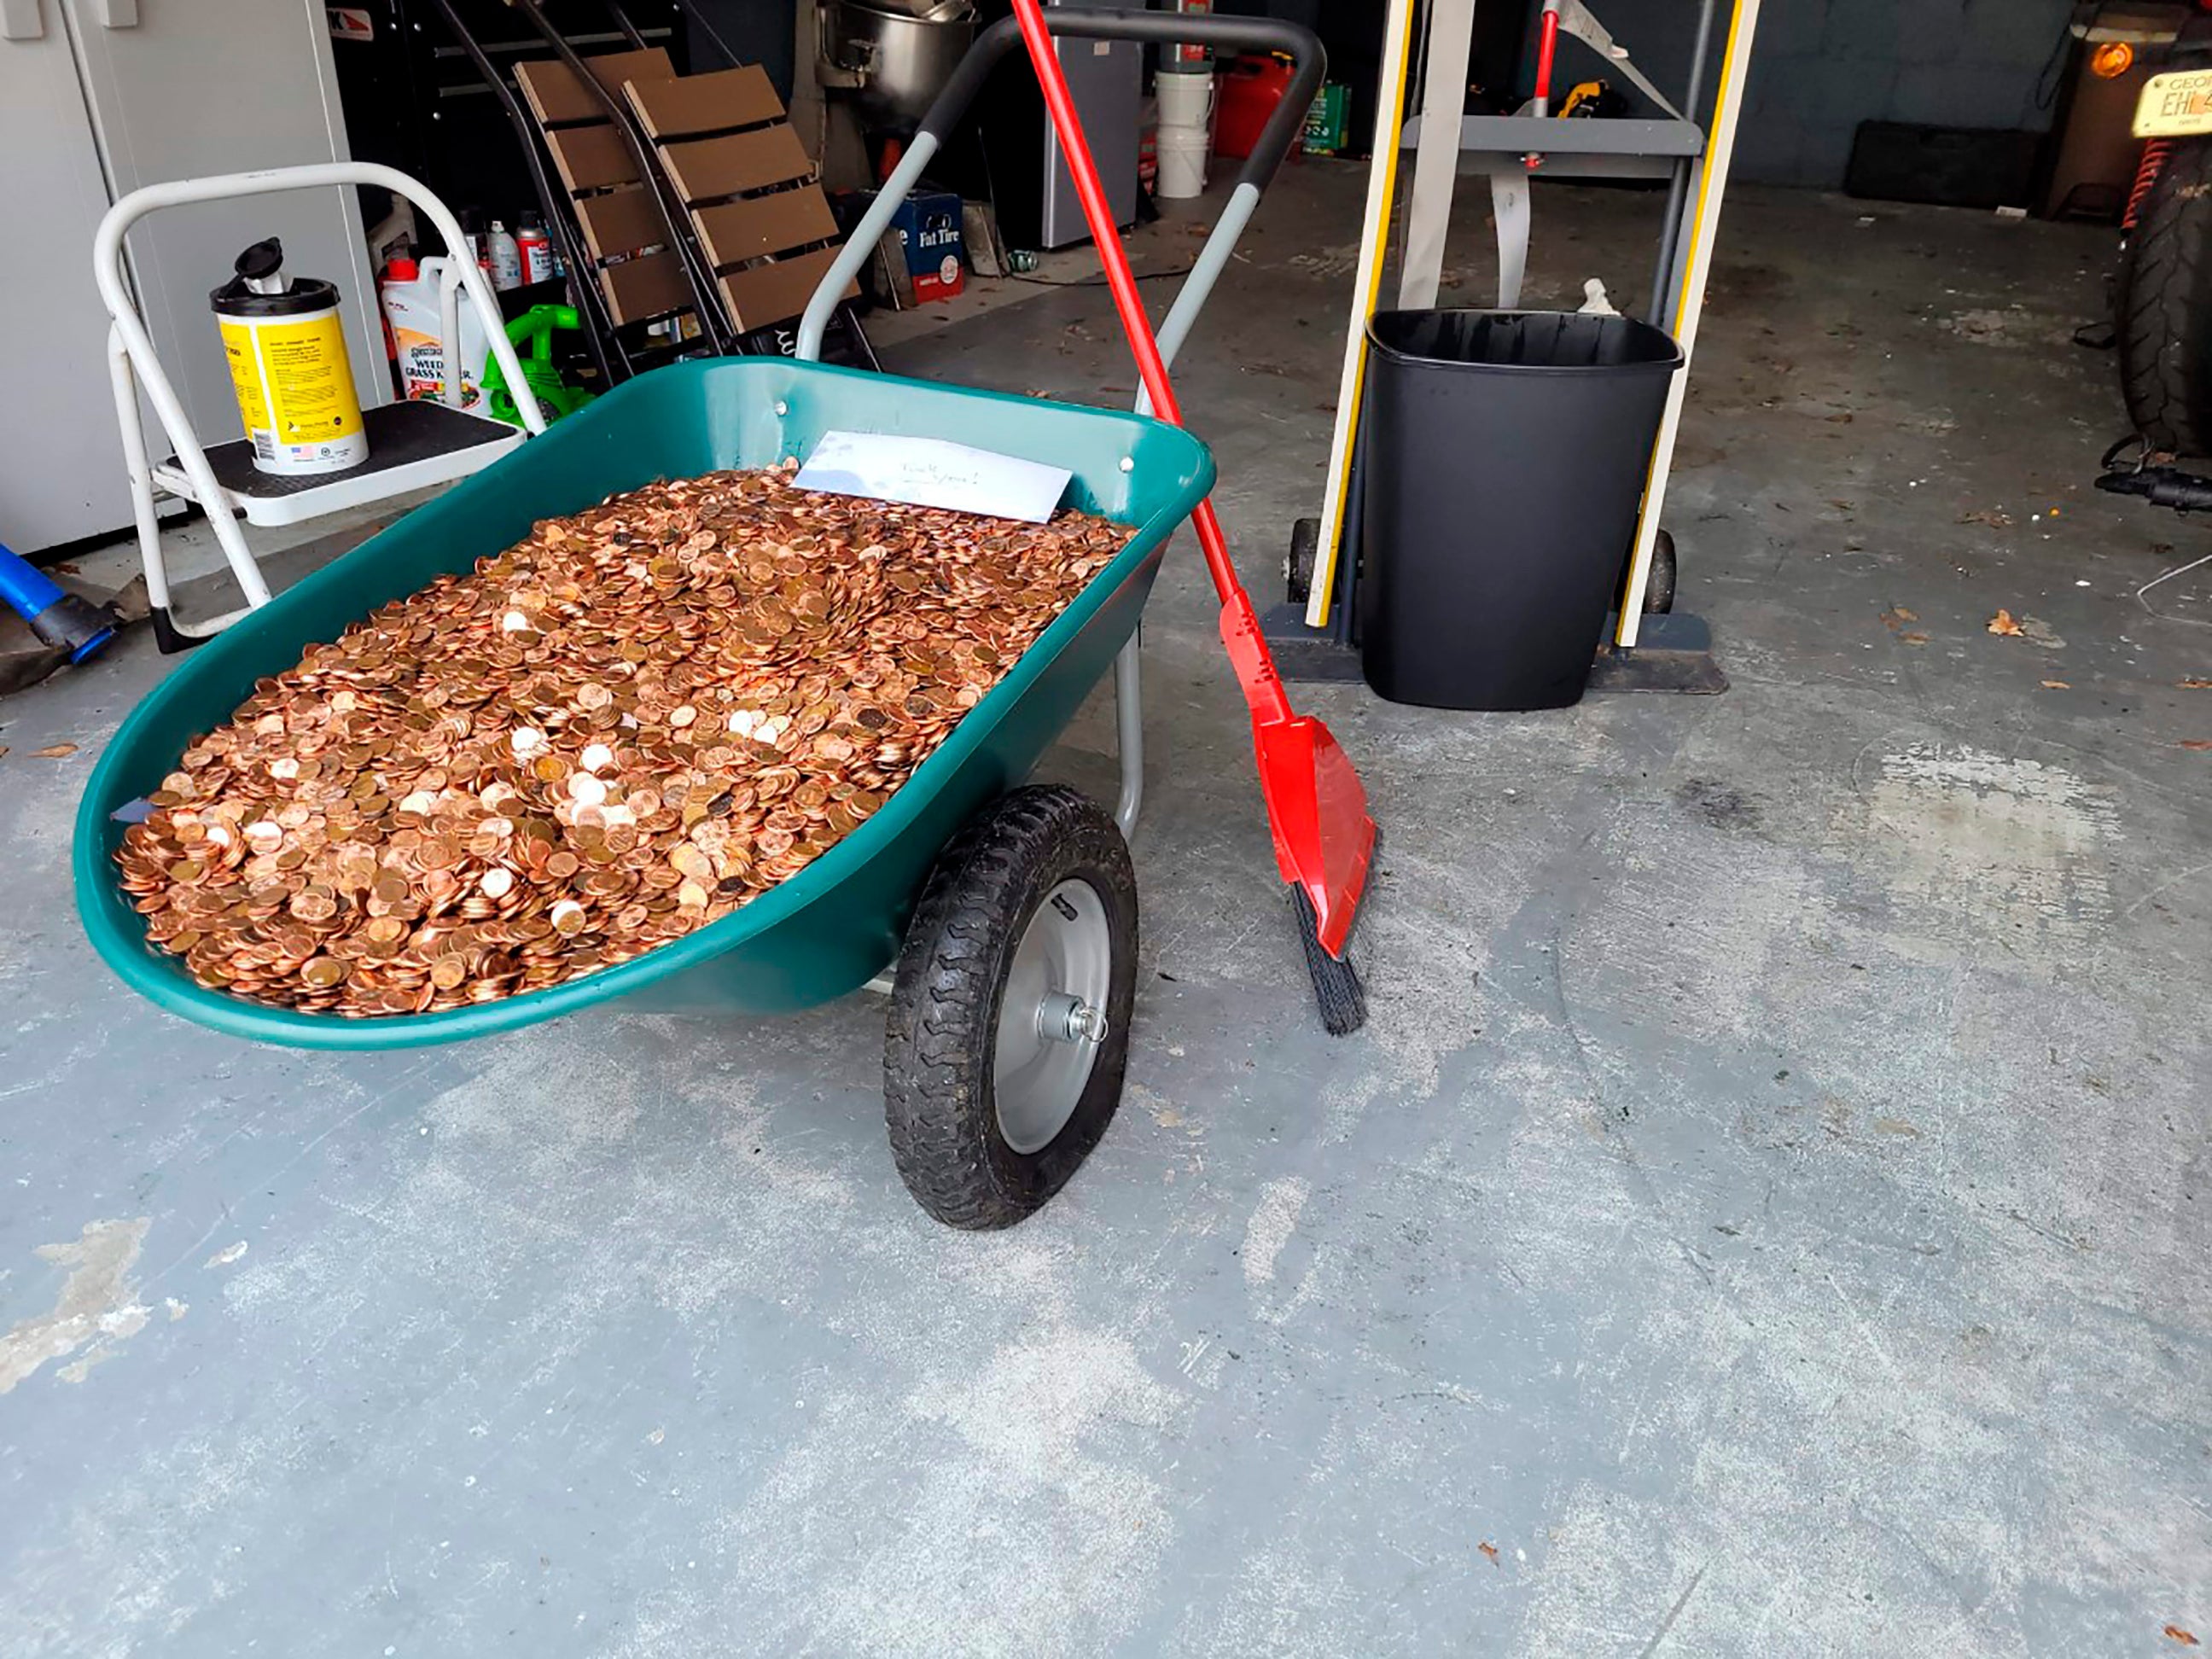 Andreas Flaten moved the more than 90,000 oil-covered pennies from his driveway to a wheelbarrow, causing its tires to deflate